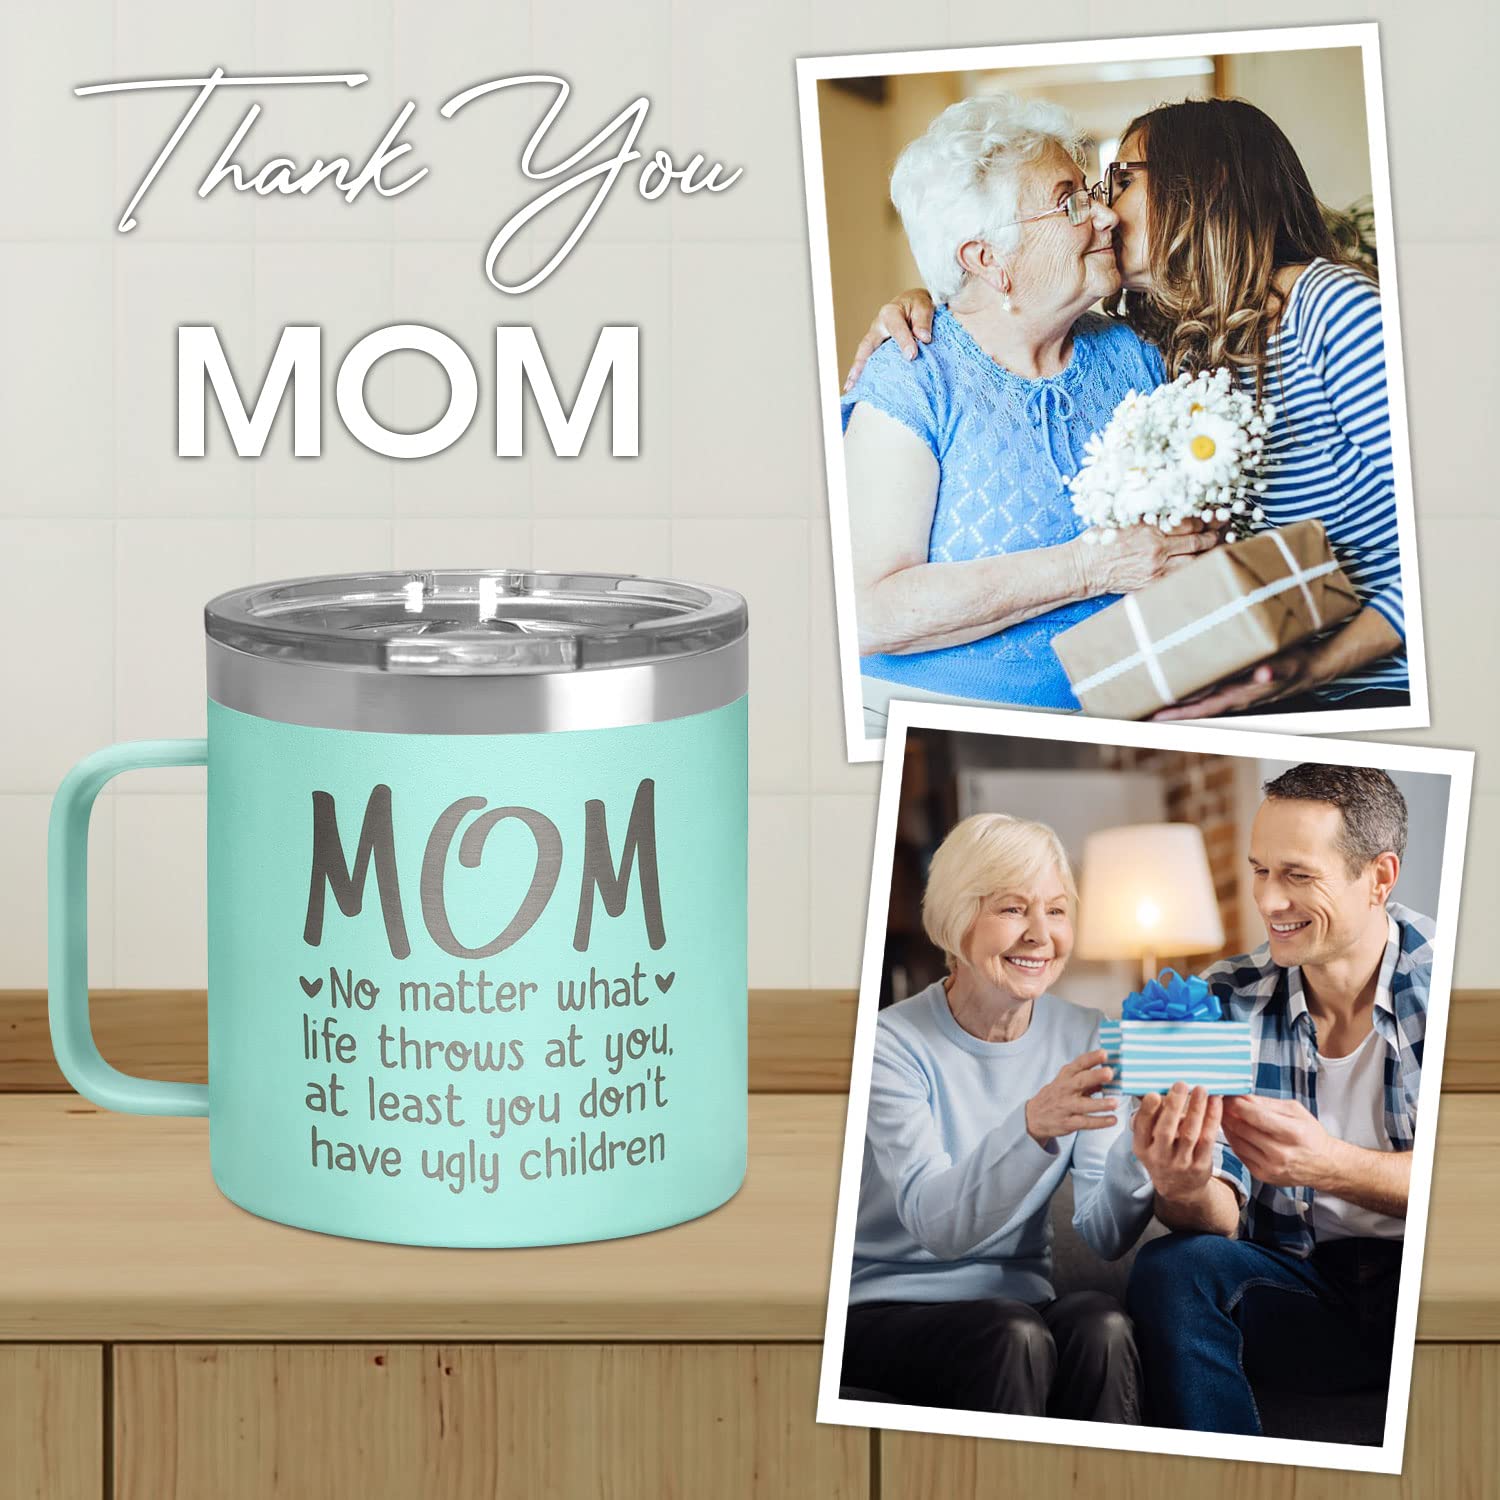 Gifts For Mom From Daughter, Son, Mother Gifts For Women, Grandma, Birthday, Thanksgiving, Christmas, Mothers Day Gifts For Women, Mom To Be, Pregnant Mom Gifts, Mom Mug Gifts Ideas, 14 Oz Coffee Mug